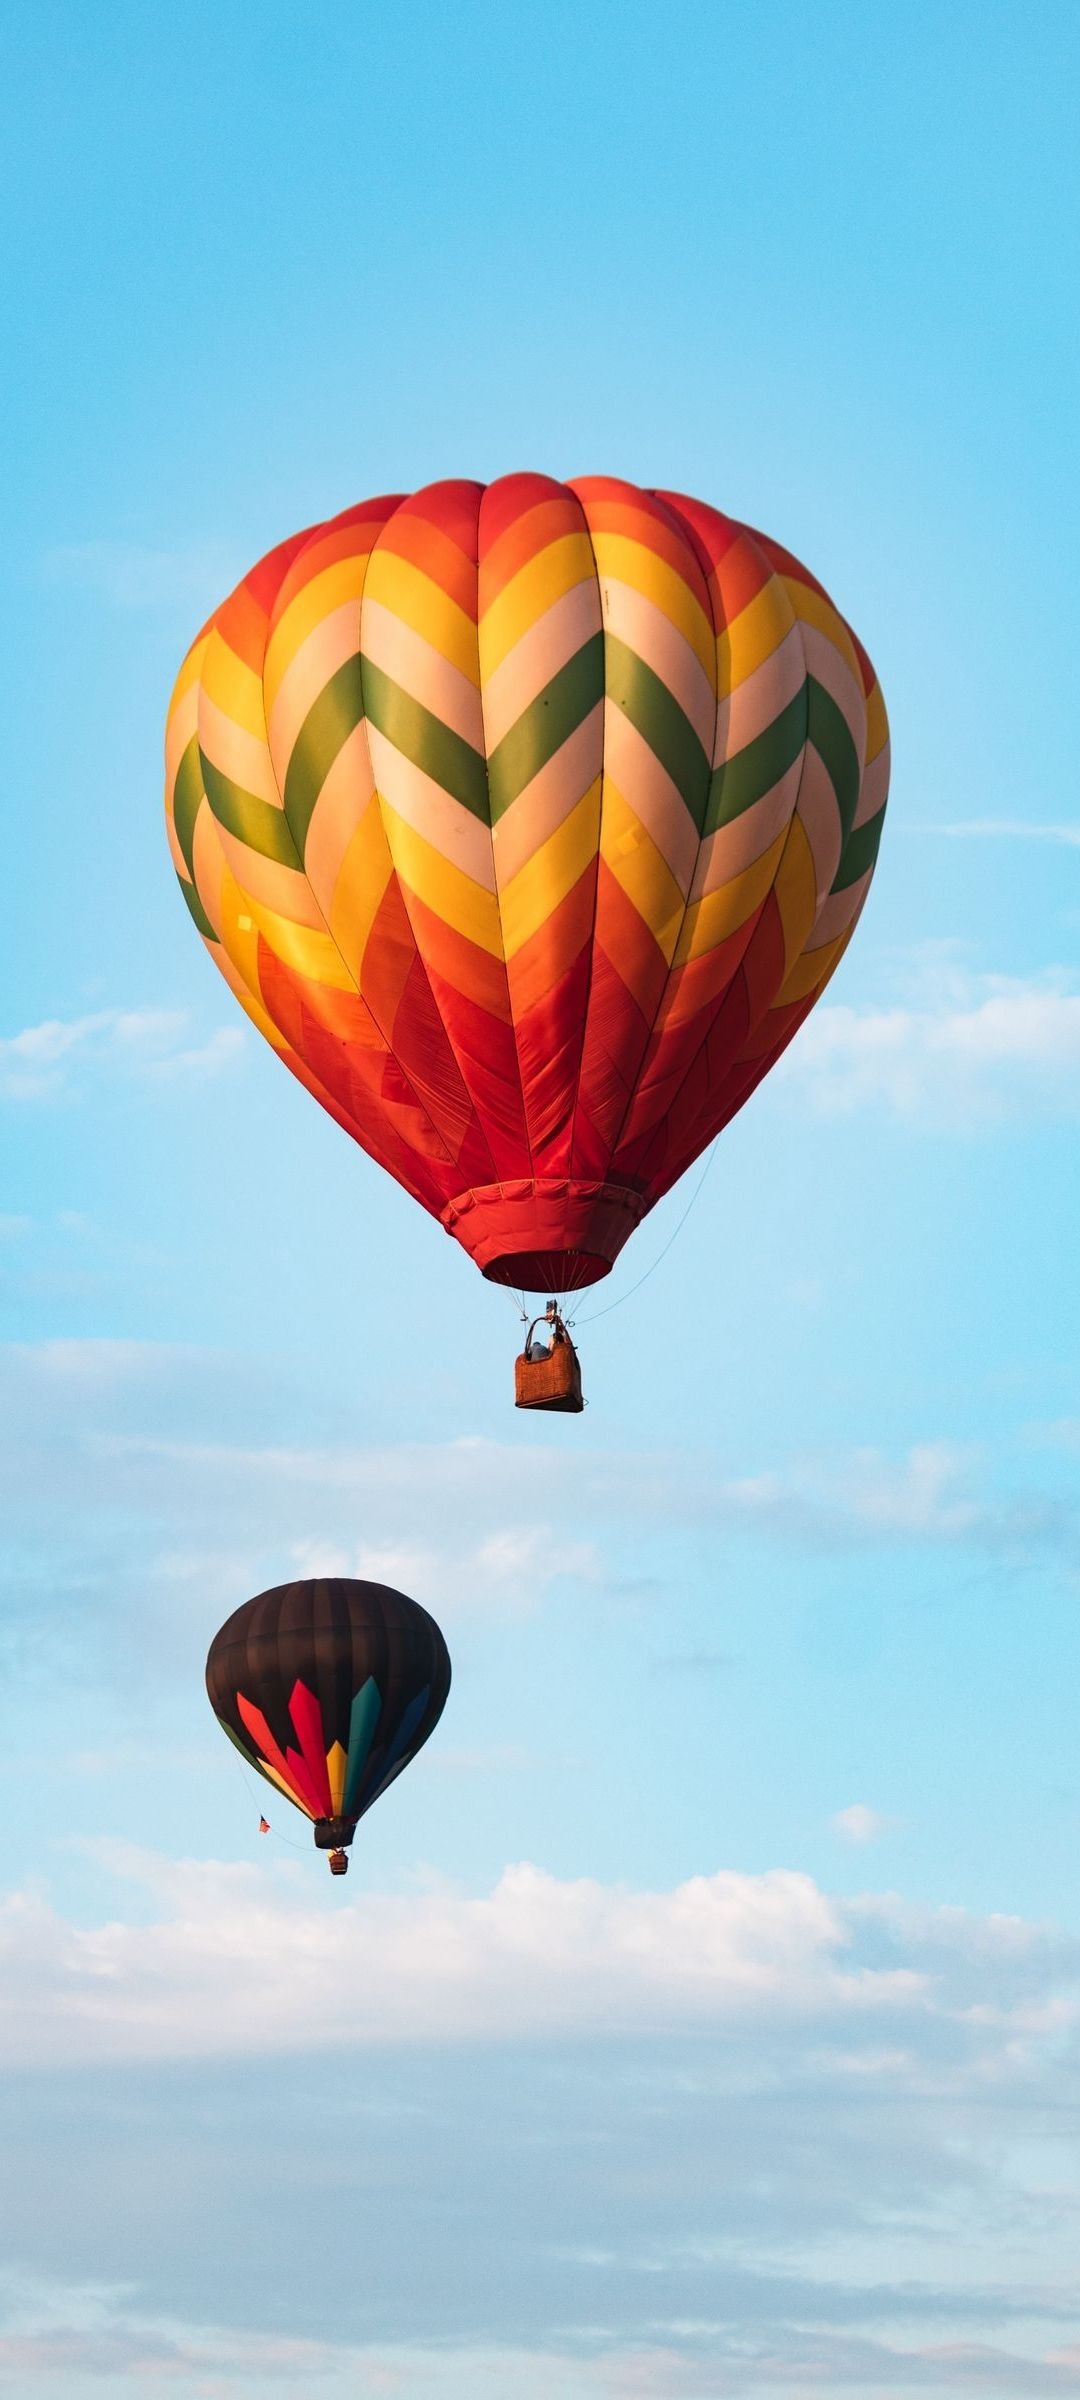 Air Sports: Two balloons move in the direction of the wind in the morning, Flying in the clouds. 1080x2400 HD Background.